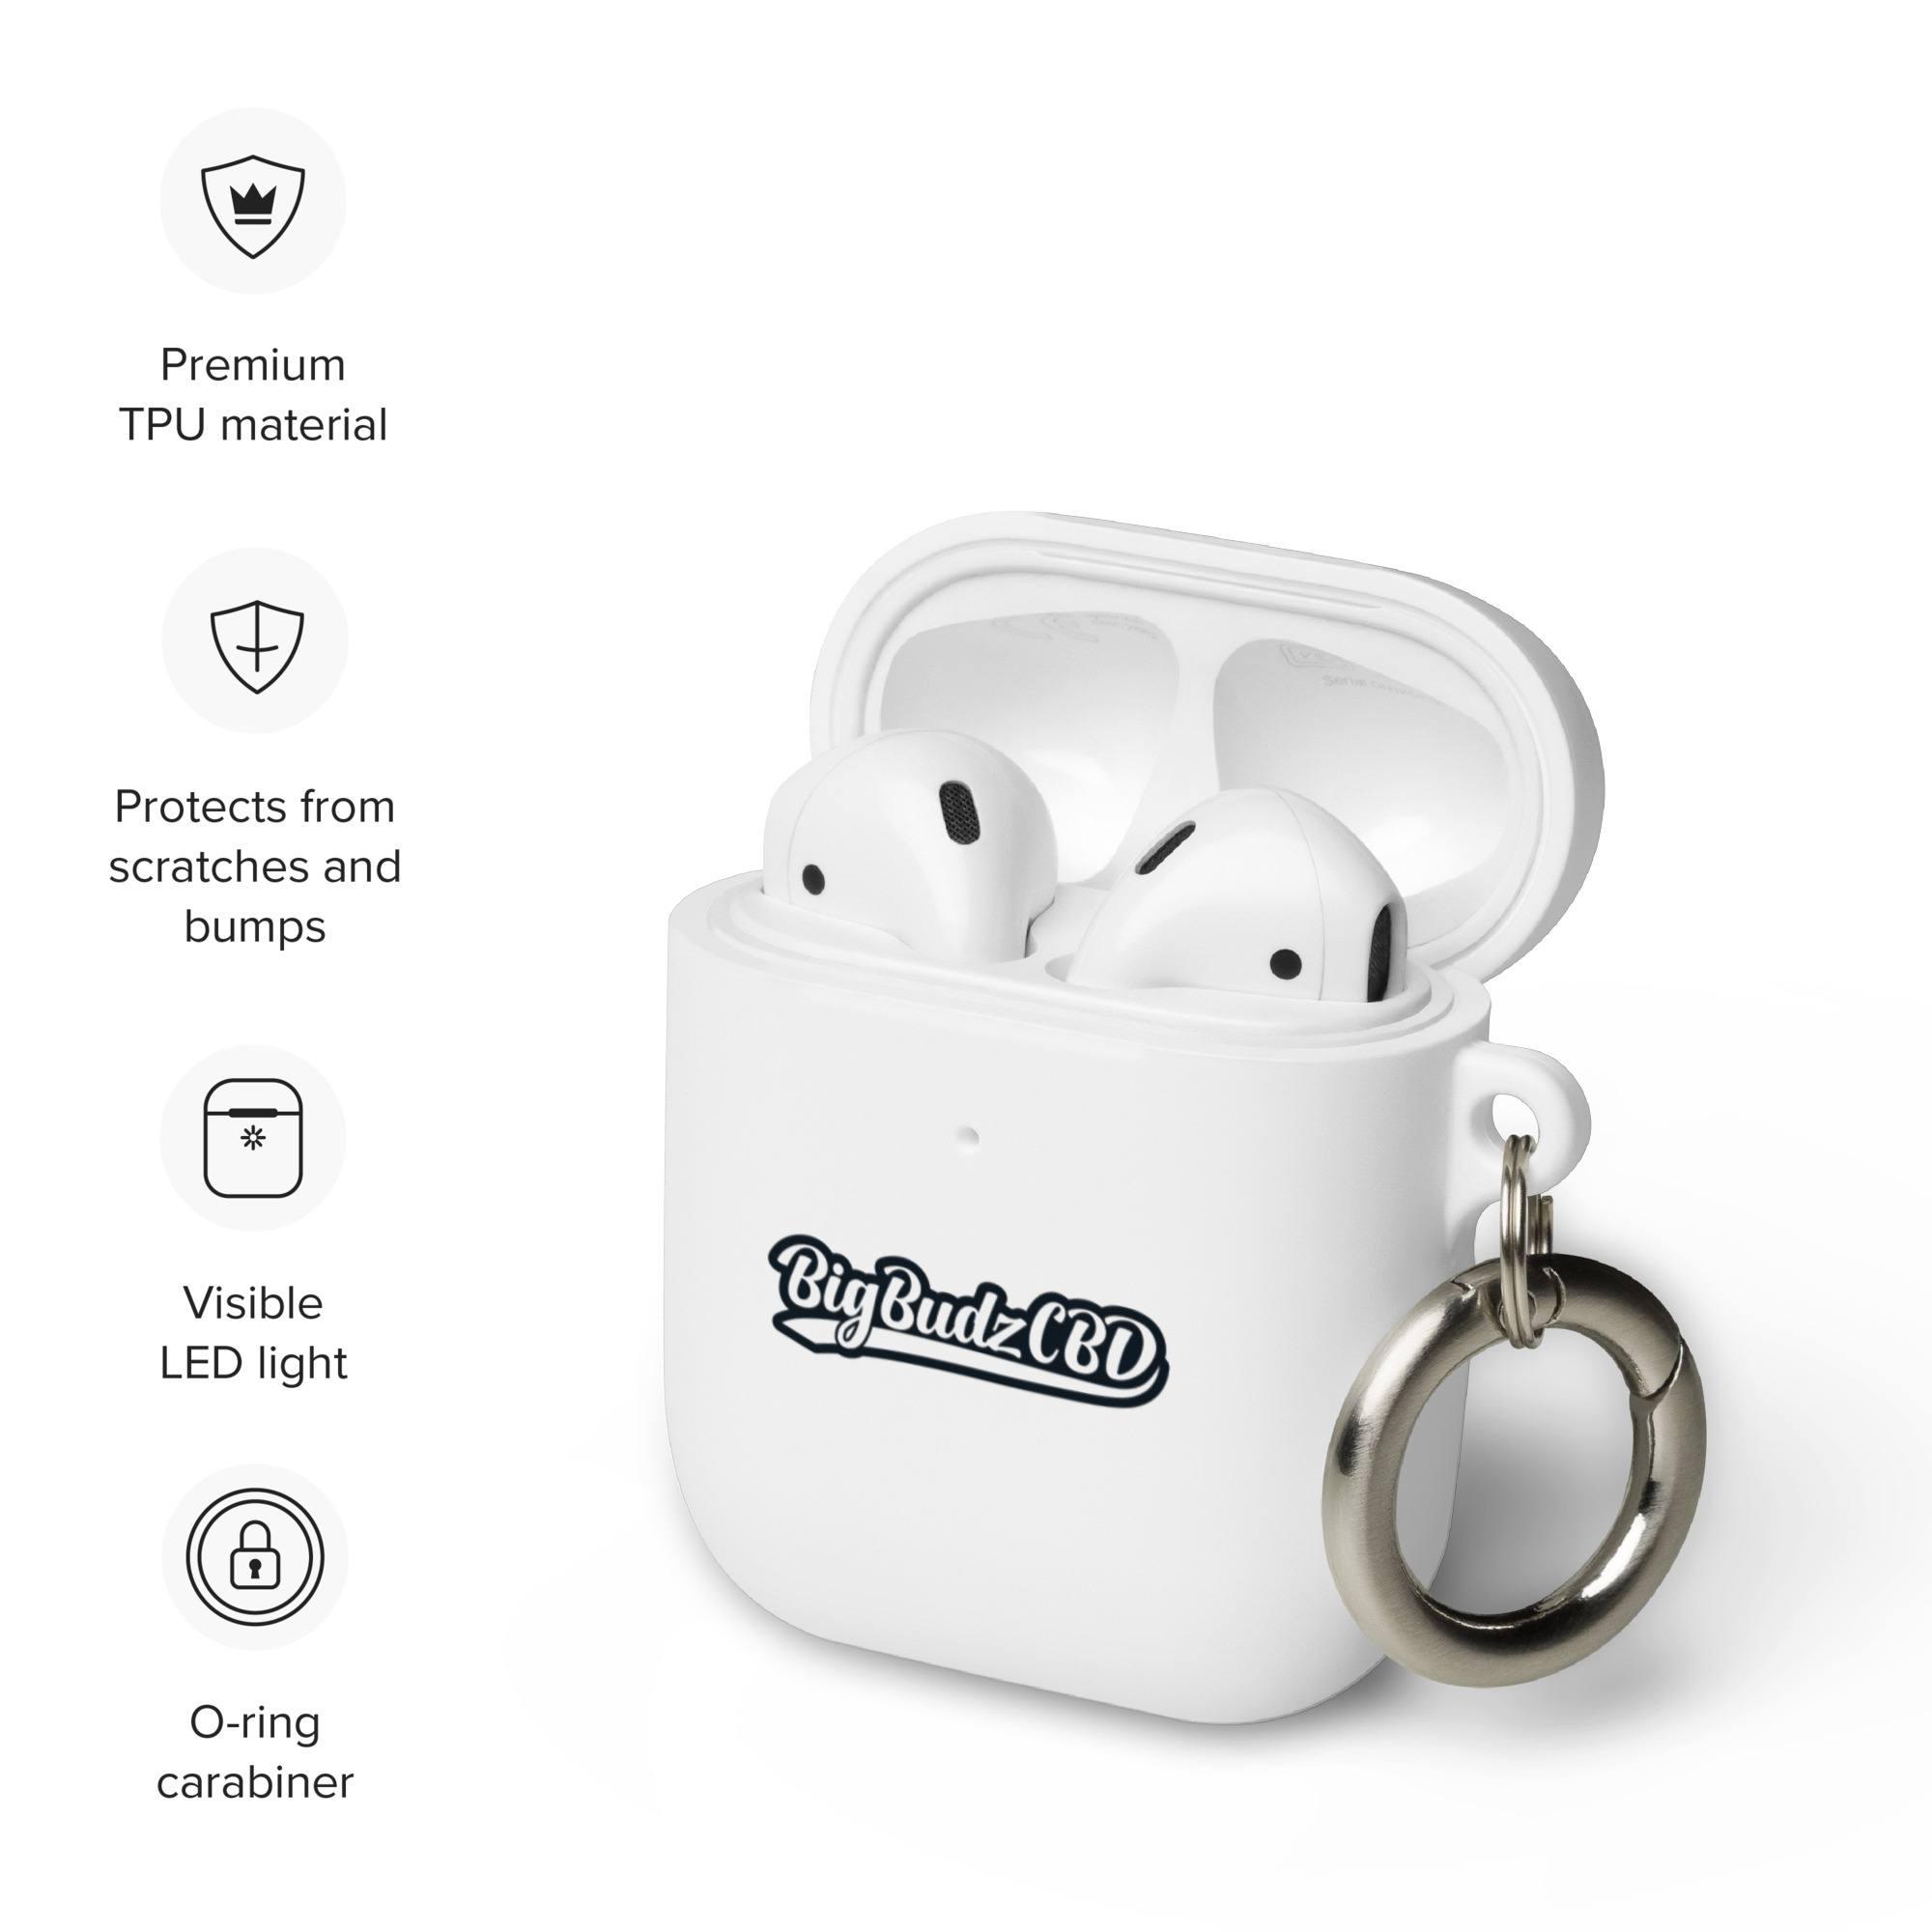 https://bigbudzcbd.com/wp-content/uploads/2024/01/rubber-case-for-airpods-white-airpods-front-659c84887bcc7.jpg